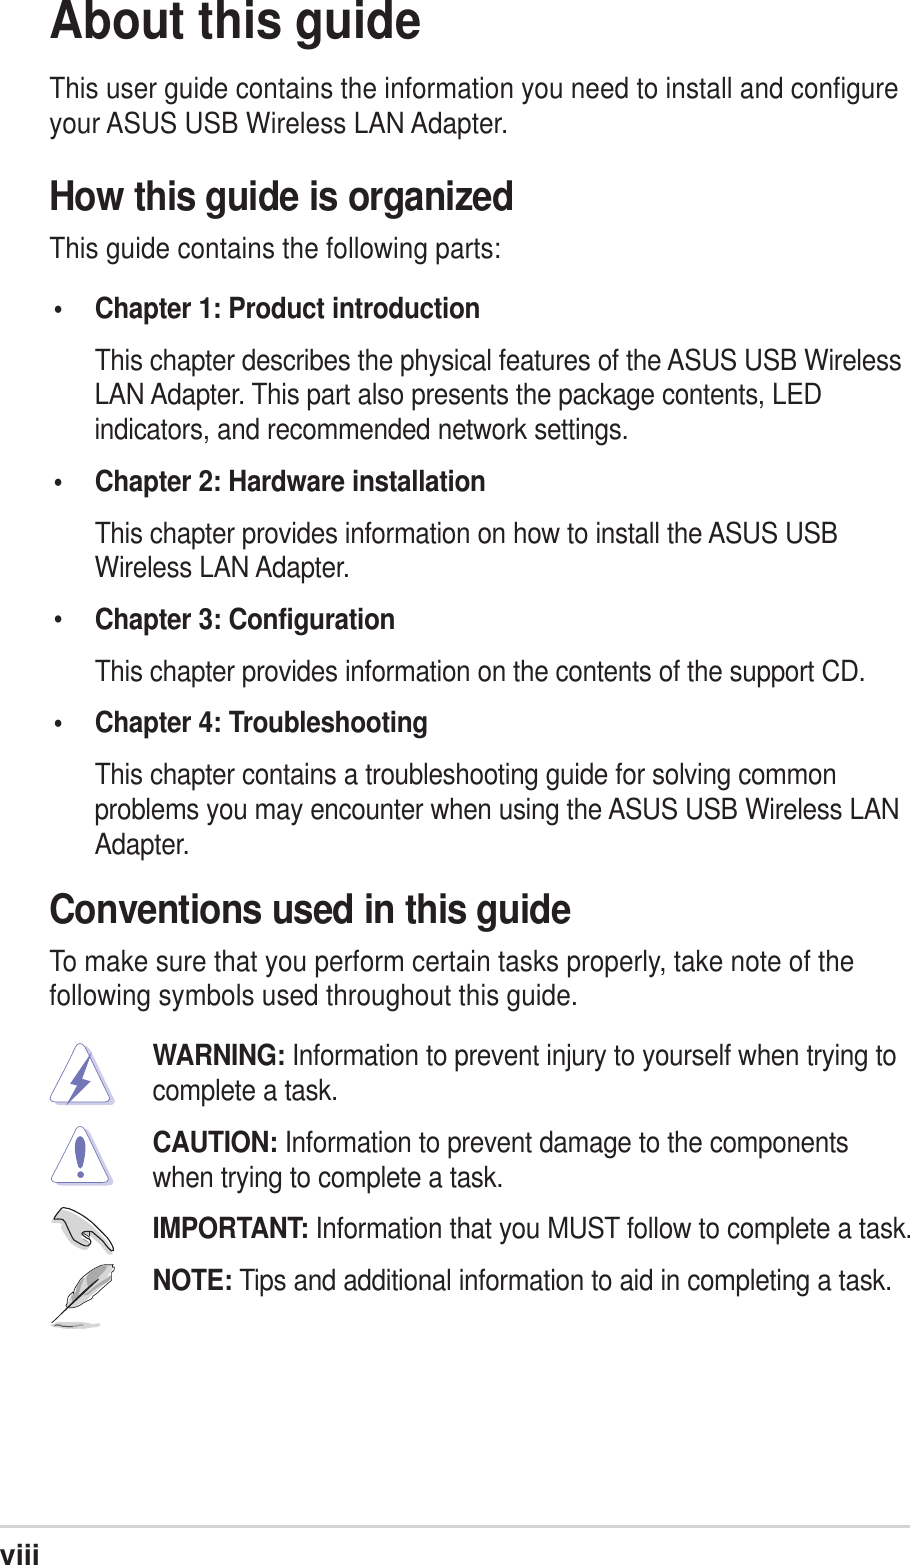 viiiAbout this guideThis user guide contains the information you need to install and configureyour ASUS USB Wireless LAN Adapter.How this guide is organizedThis guide contains the following parts:• Chapter 1: Product introductionThis chapter describes the physical features of the ASUS USB WirelessLAN Adapter. This part also presents the package contents, LEDindicators, and recommended network settings.• Chapter 2: Hardware installationThis chapter provides information on how to install the ASUS USBWireless LAN Adapter.•Chapter 3: ConfigurationThis chapter provides information on the contents of the support CD.• Chapter 4: TroubleshootingThis chapter contains a troubleshooting guide for solving commonproblems you may encounter when using the ASUS USB Wireless LANAdapter.Conventions used in this guideTo make sure that you perform certain tasks properly, take note of thefollowing symbols used throughout this guide.WARNING: Information to prevent injury to yourself when trying tocomplete a task.CAUTION: Information to prevent damage to the componentswhen trying to complete a task.IMPORTANT: Information that you MUST follow to complete a task.NOTE: Tips and additional information to aid in completing a task.